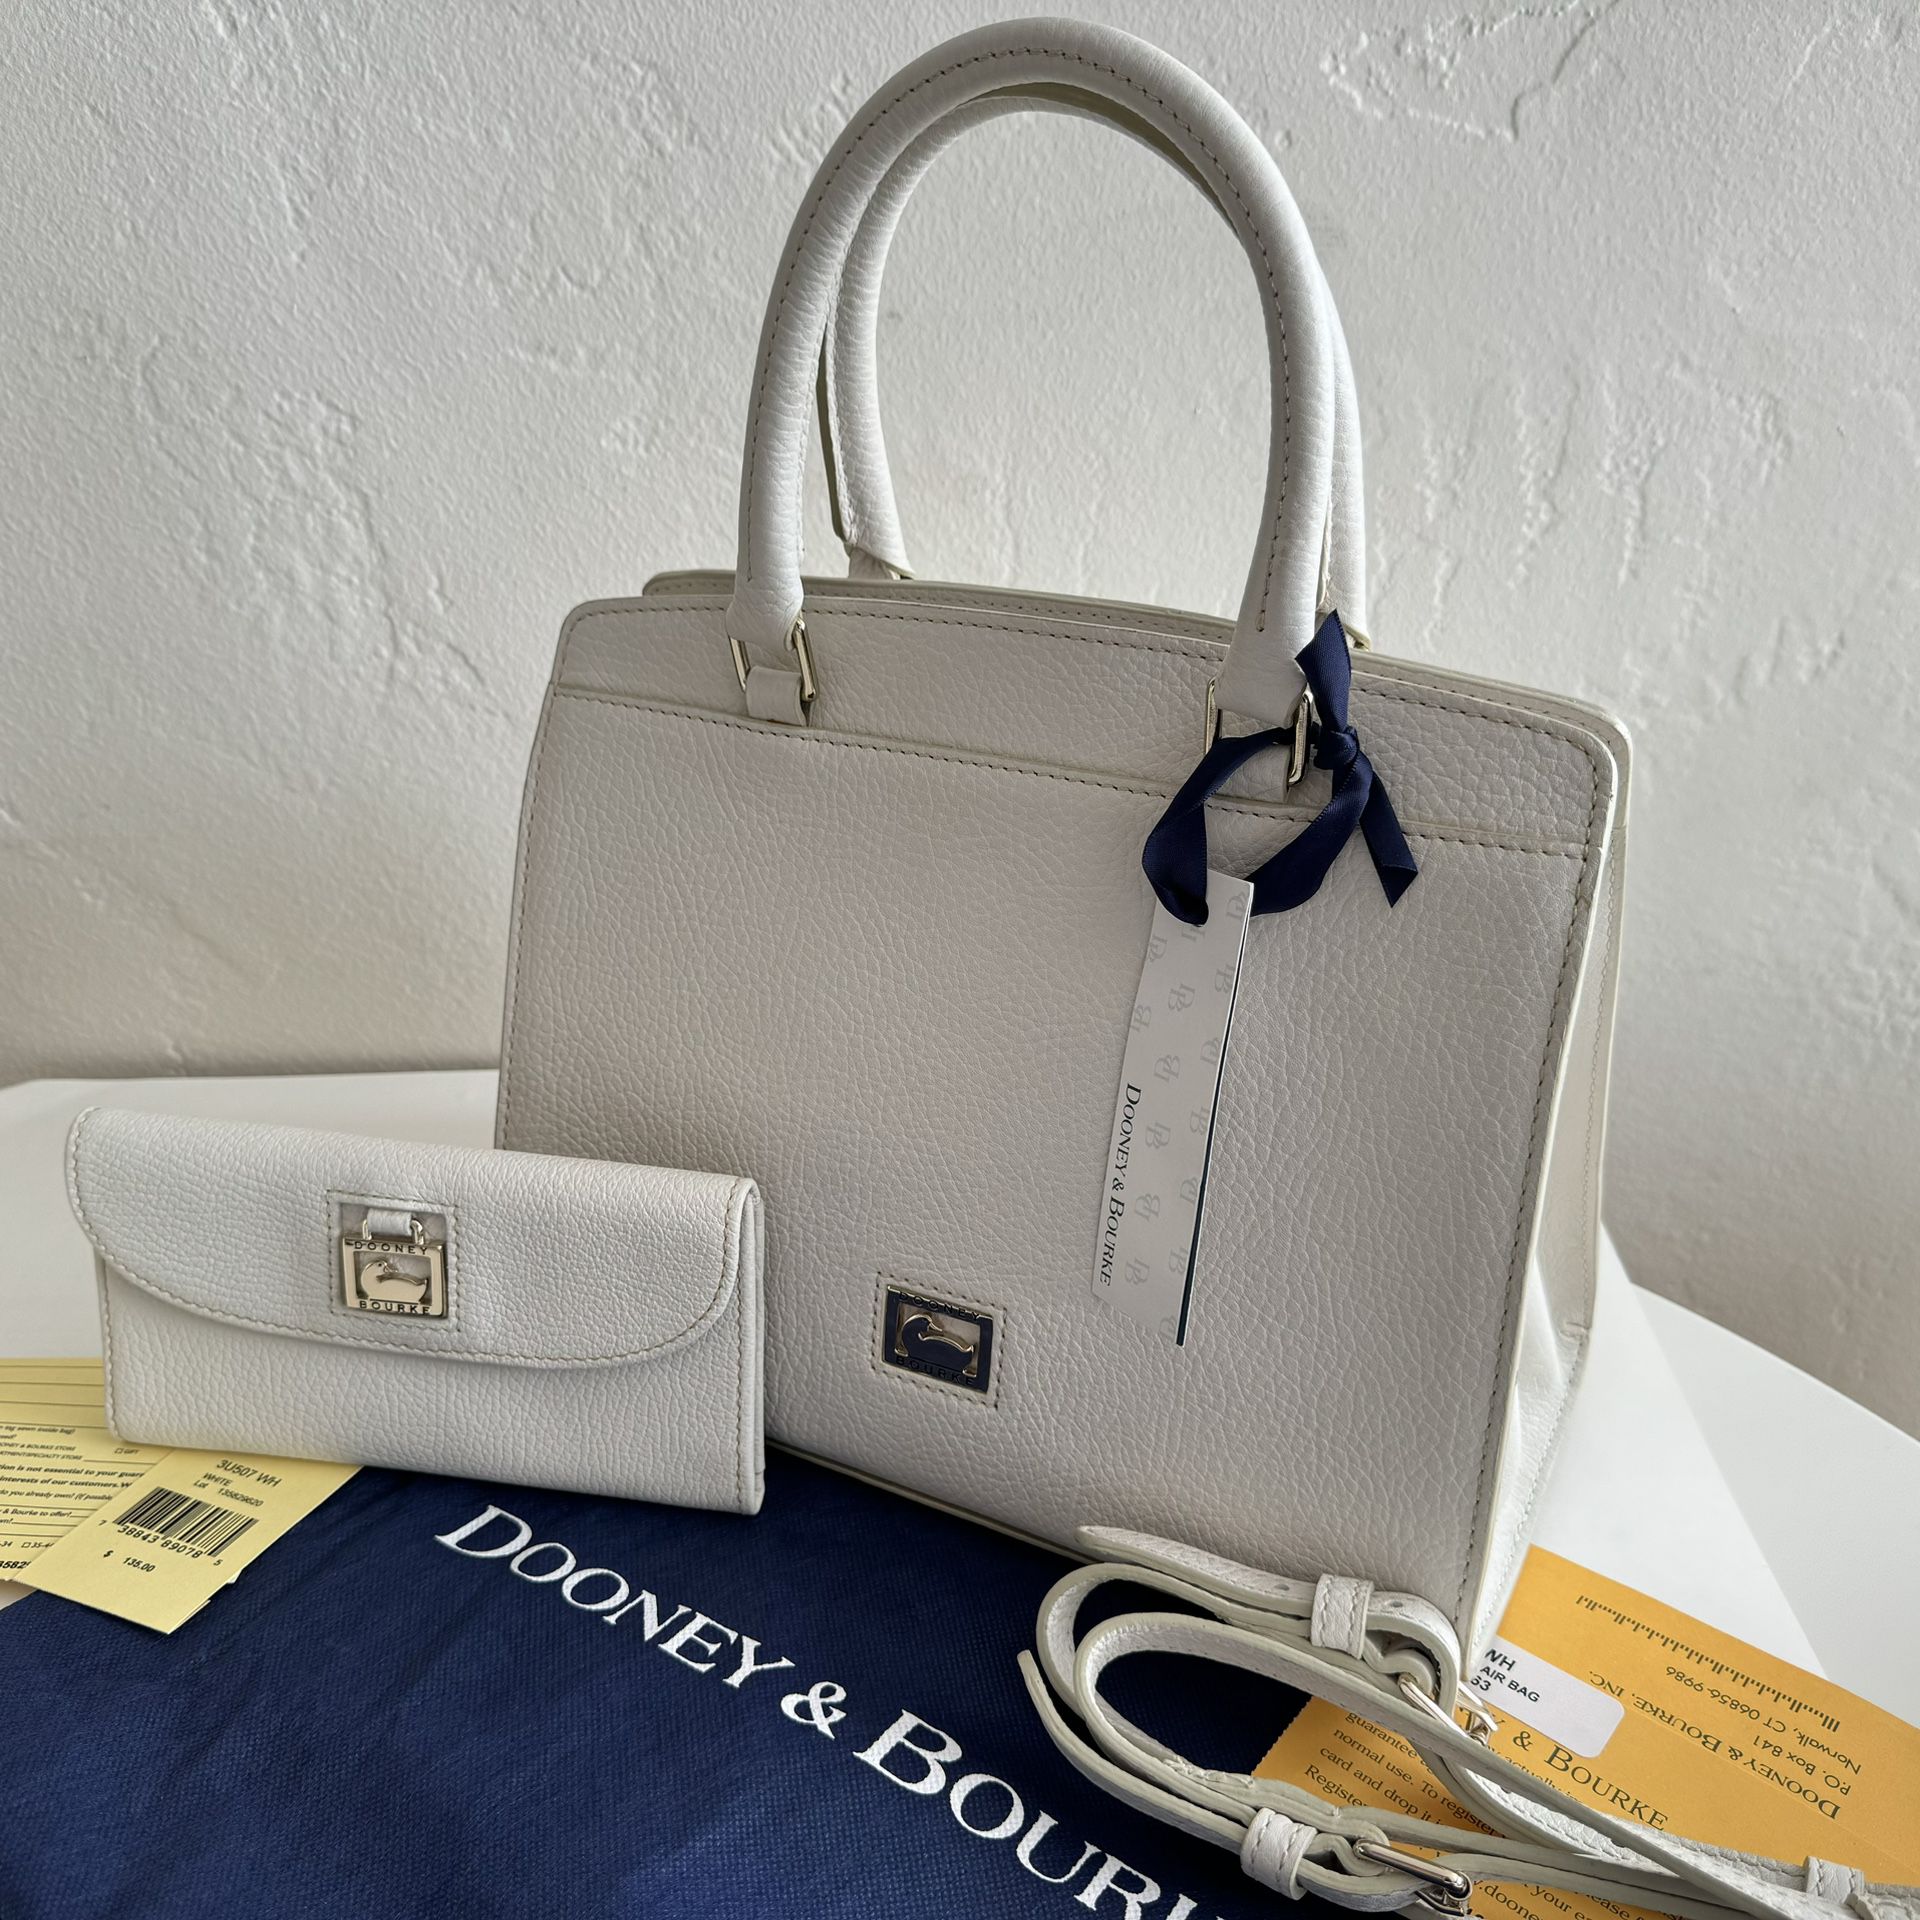 NWT Dooney & Bourke Blair Bag and Large Wallet, White Leather Tote Purse Handbag